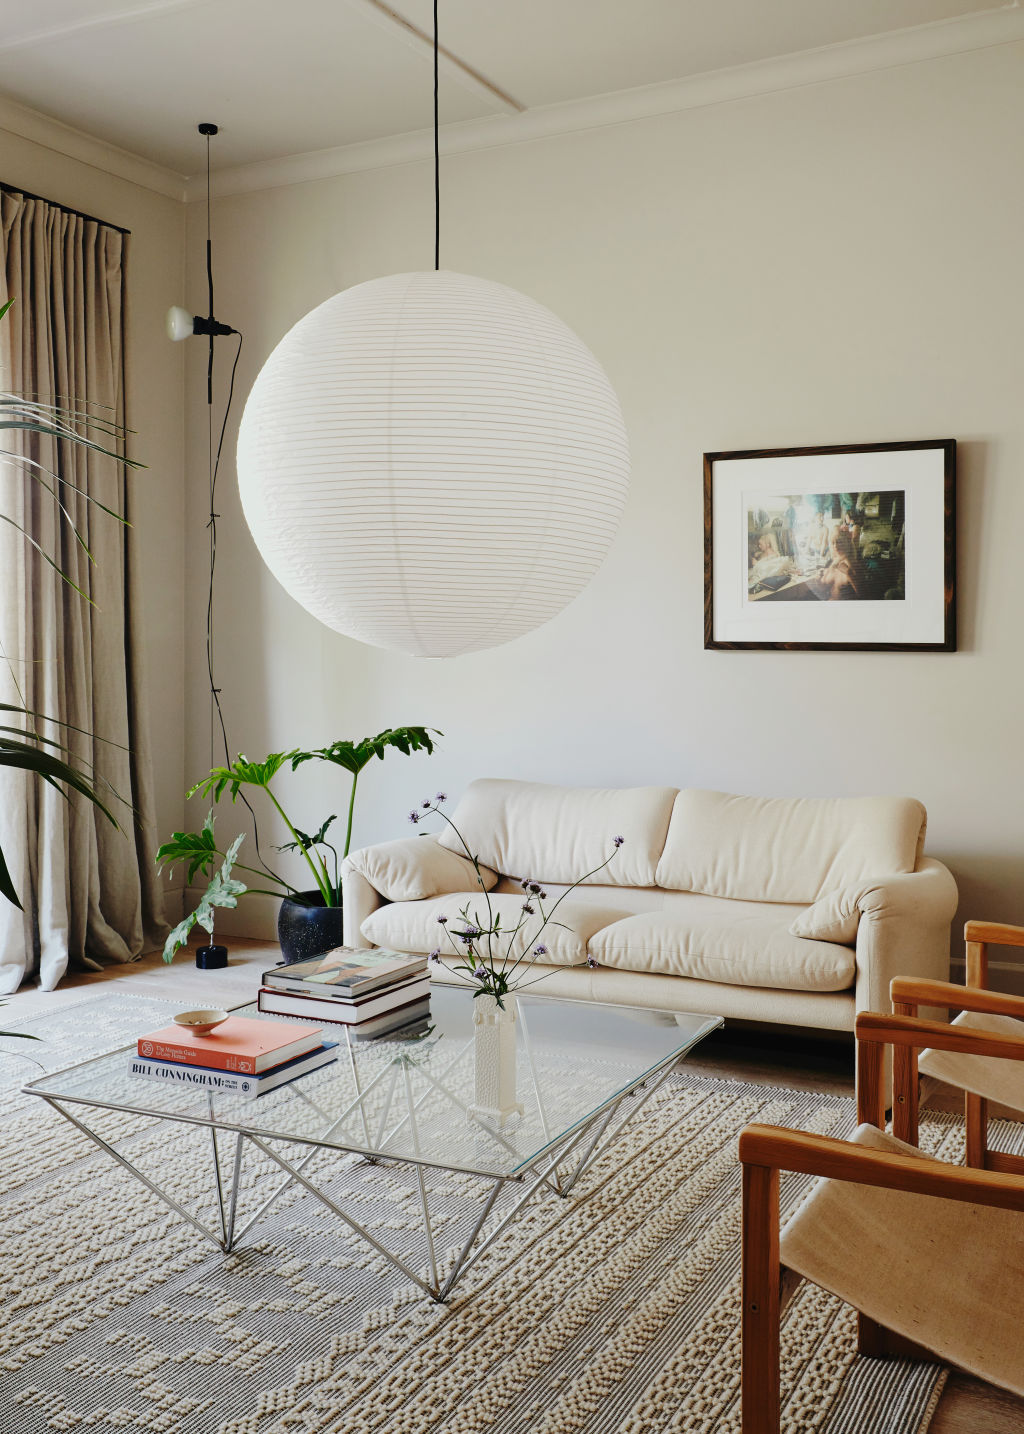 Egan has sourced second-hand furniture as much as possible to keep costs down and add character.  Styling: Annie Portelli. Photo: Amelia Stanwix for The Design Files